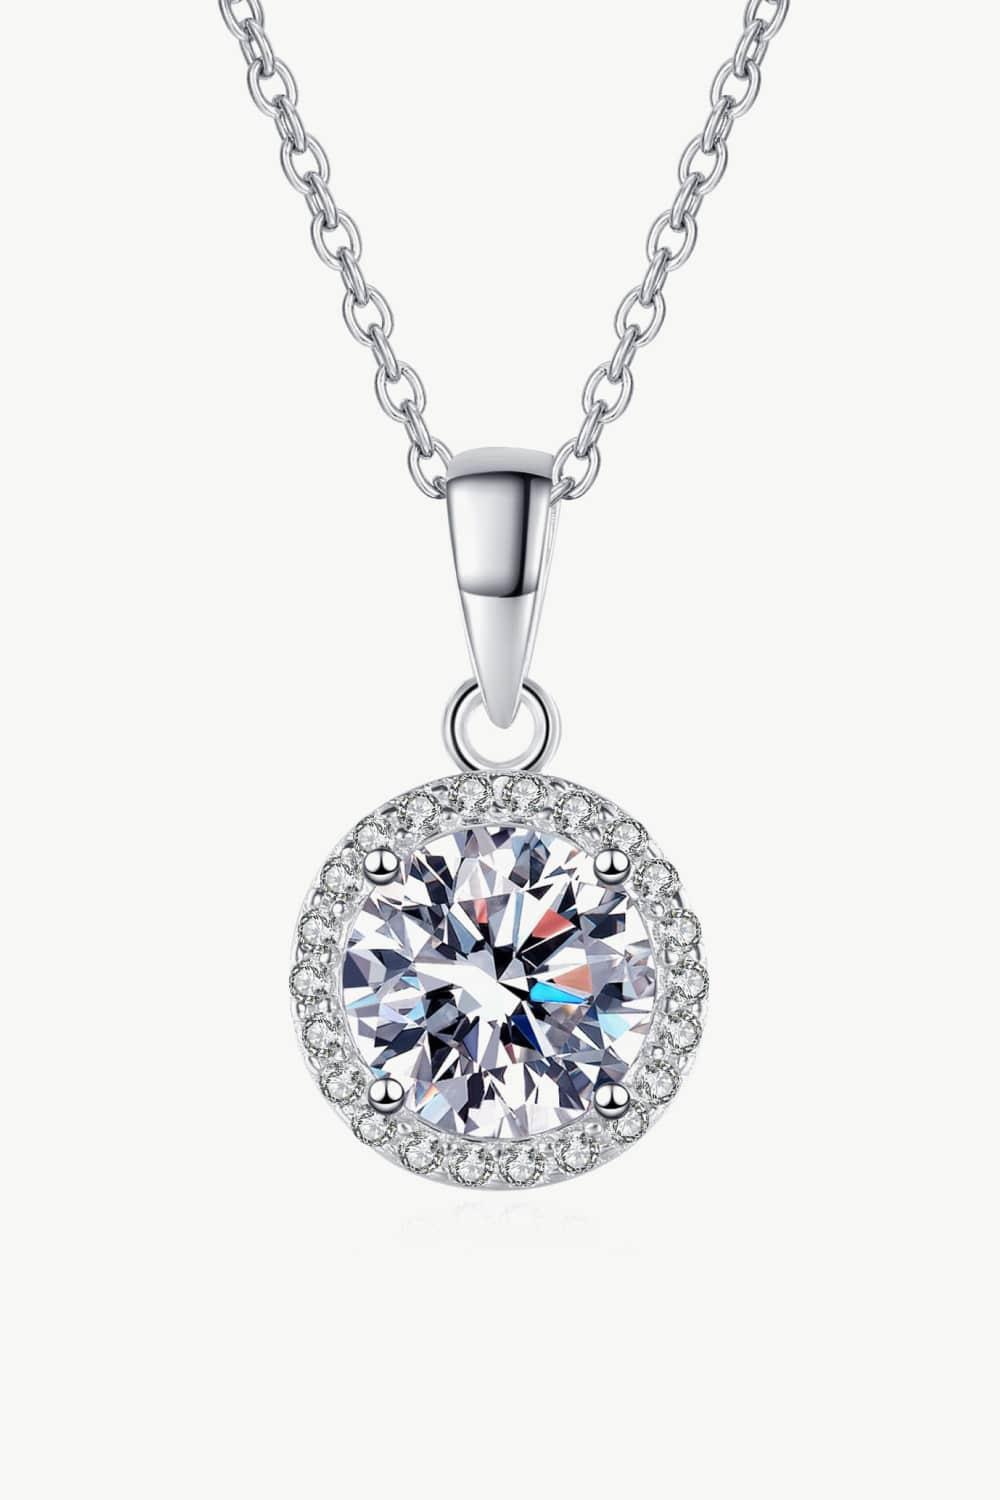 Chance to Charm 1 Carat Moissanite Round Pendant Chain Necklace - Trendha